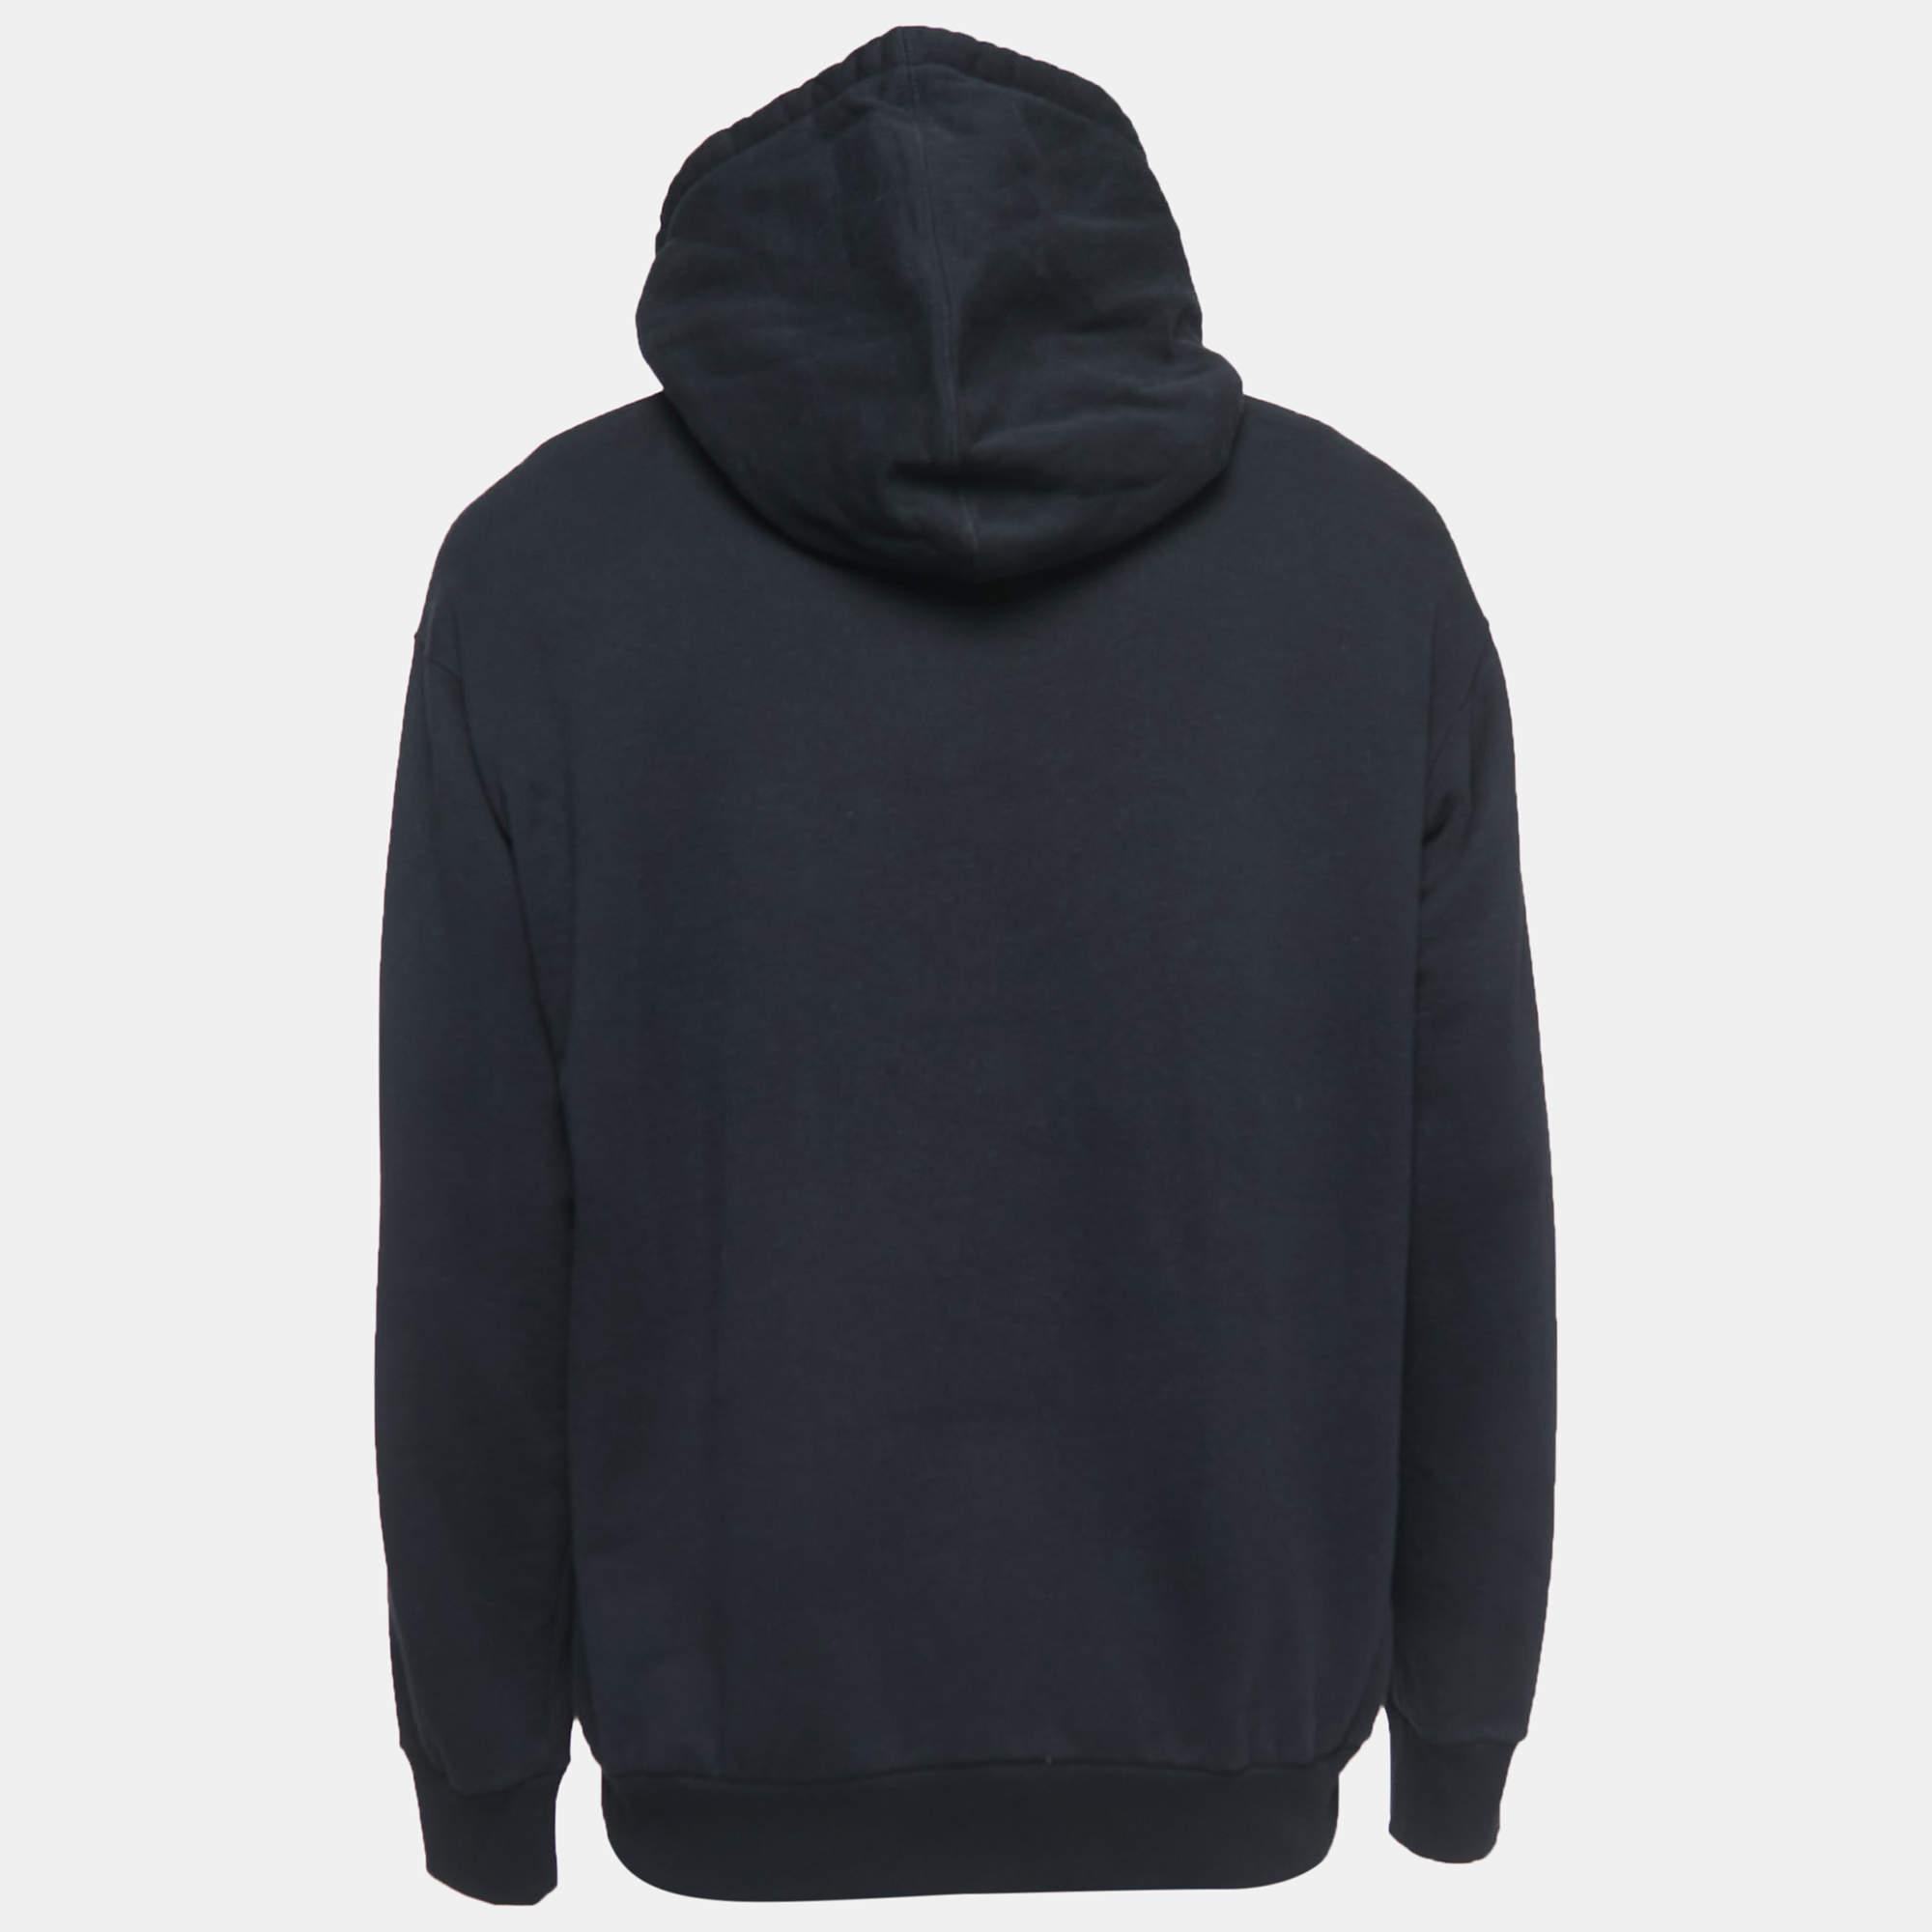 This black hoodie from Gucci X The North Face is for men. Made of cotton, it has long sleeves, a drawstring hood, and signature details on the front. Embrace all-day comfort with this creation.

